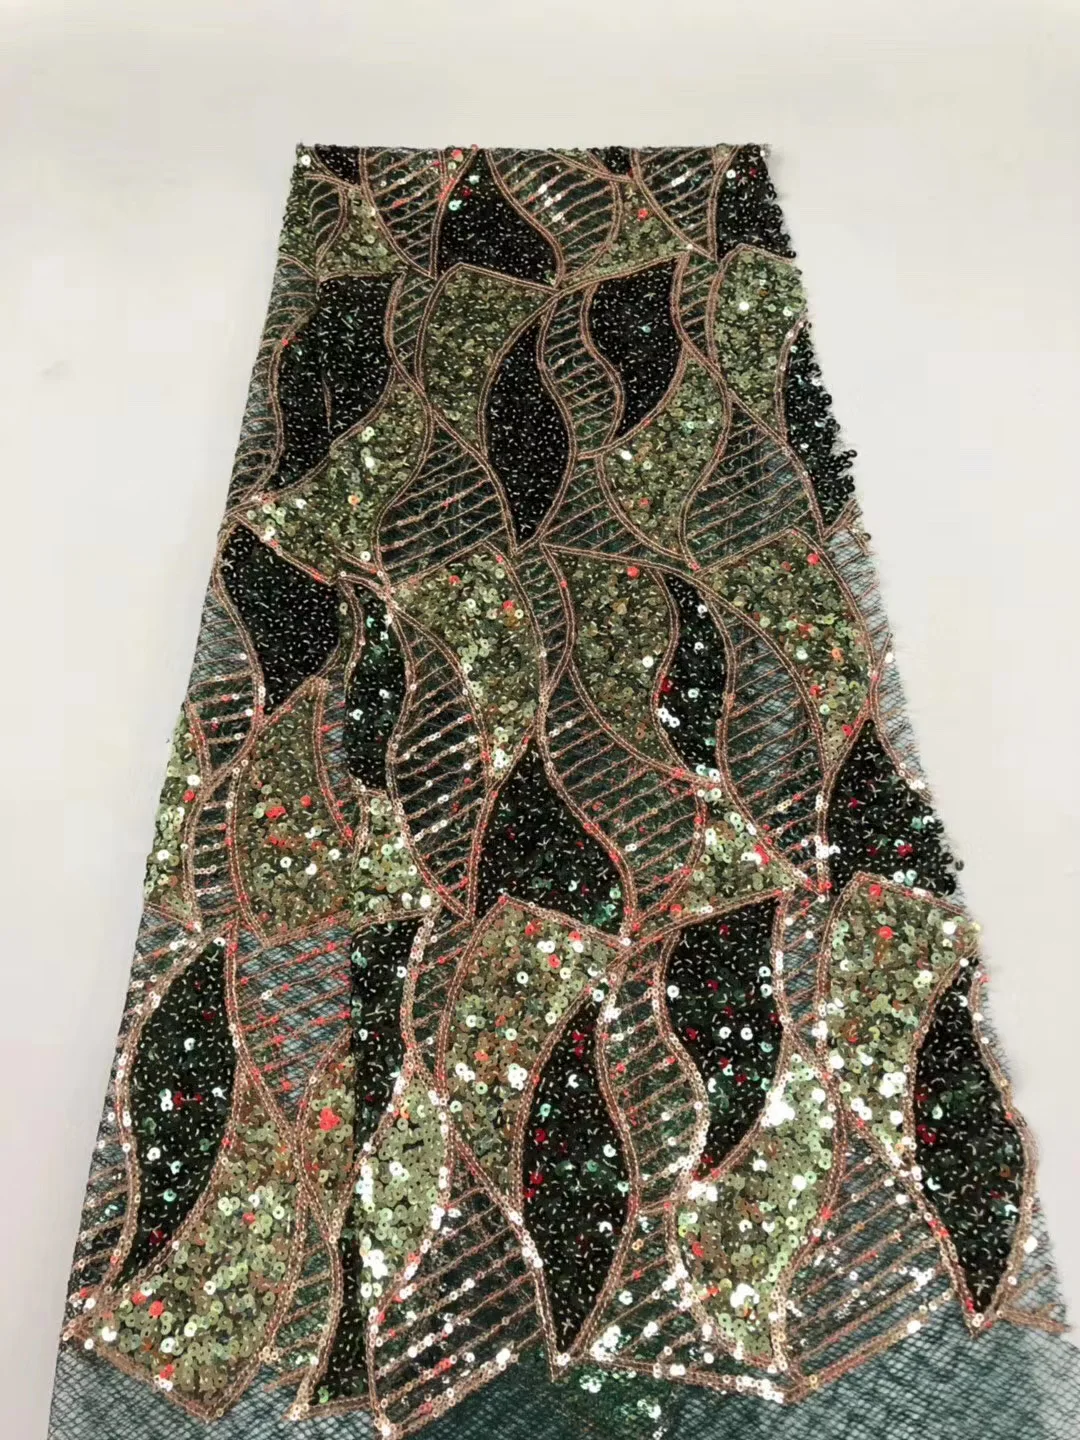 

High-quality Sequential FabricsAfrican Gauze Mesh Lace Fabric Sequin Lace Fabric New Product Nigeria Mesh Lace Fabric R39751